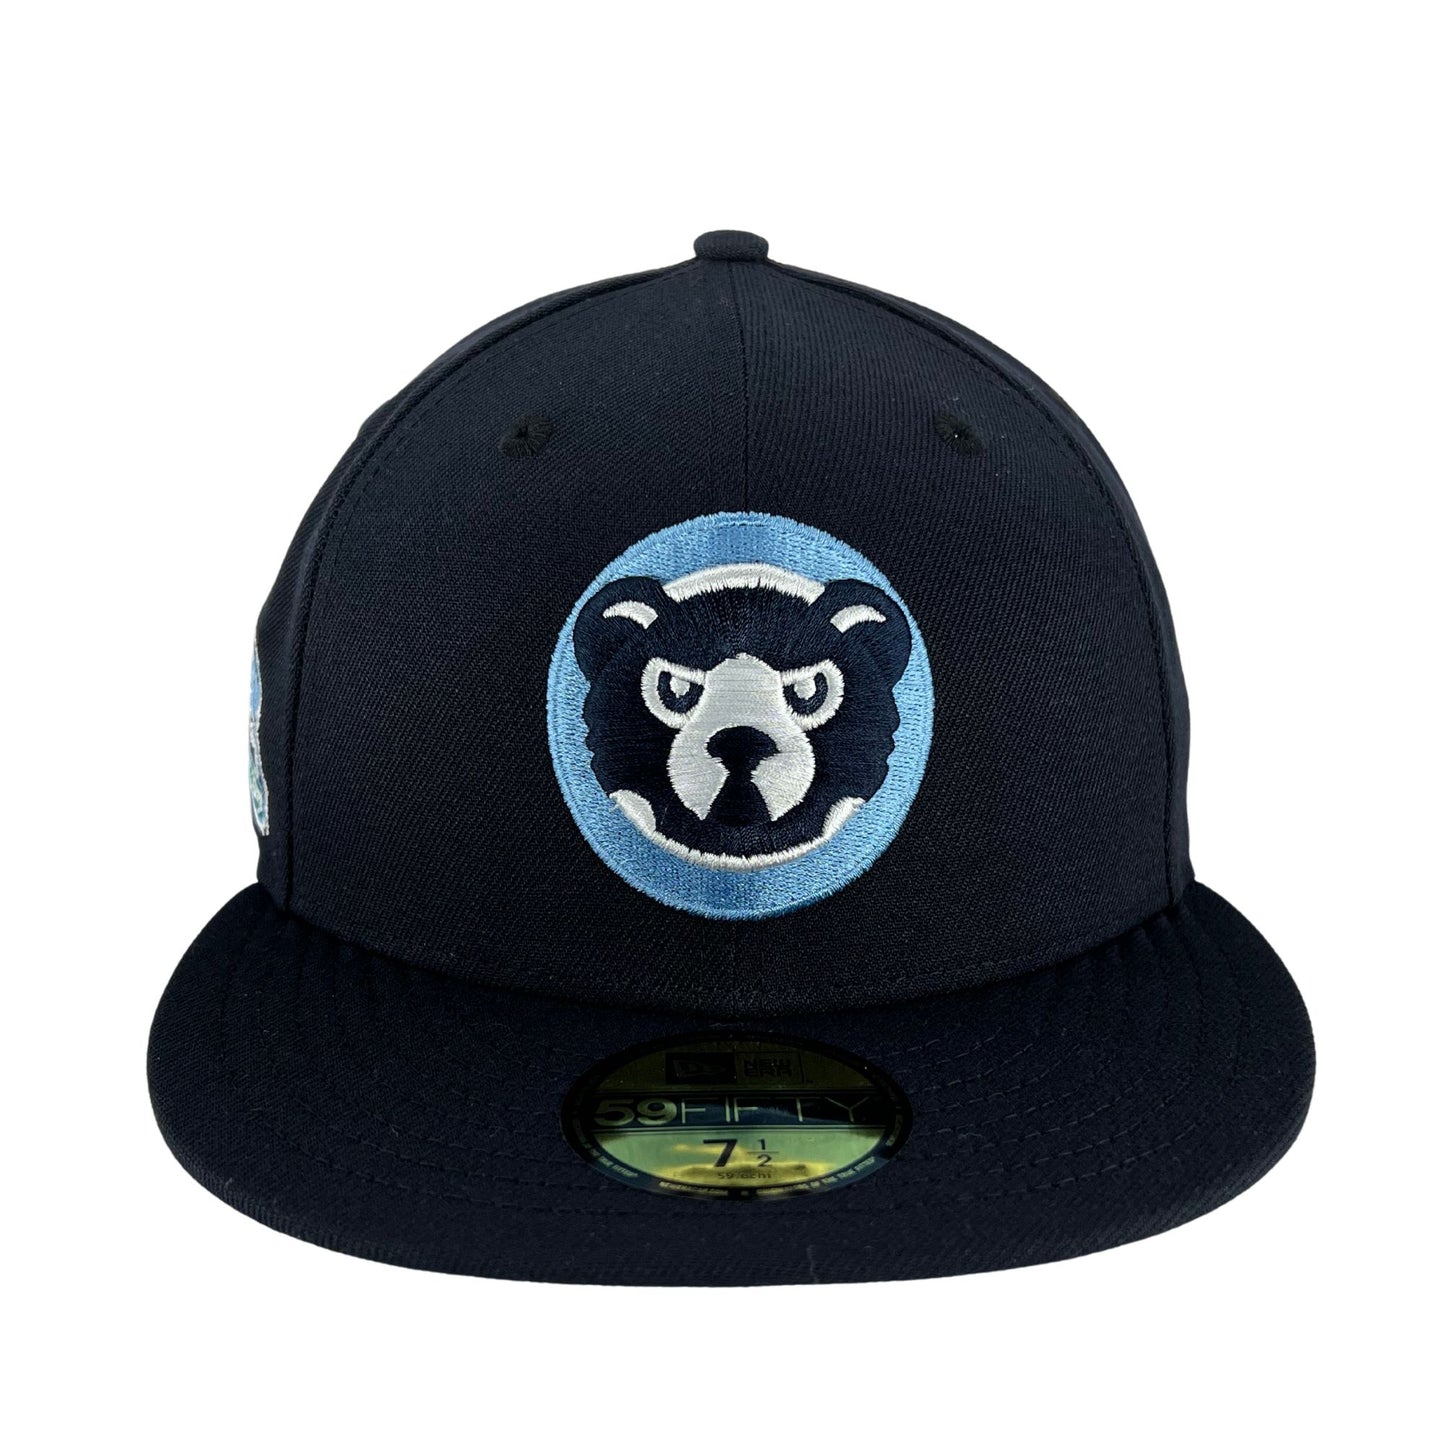 Chicago Cubs Navy Sky New Era 59FIFTY Fitted Hat